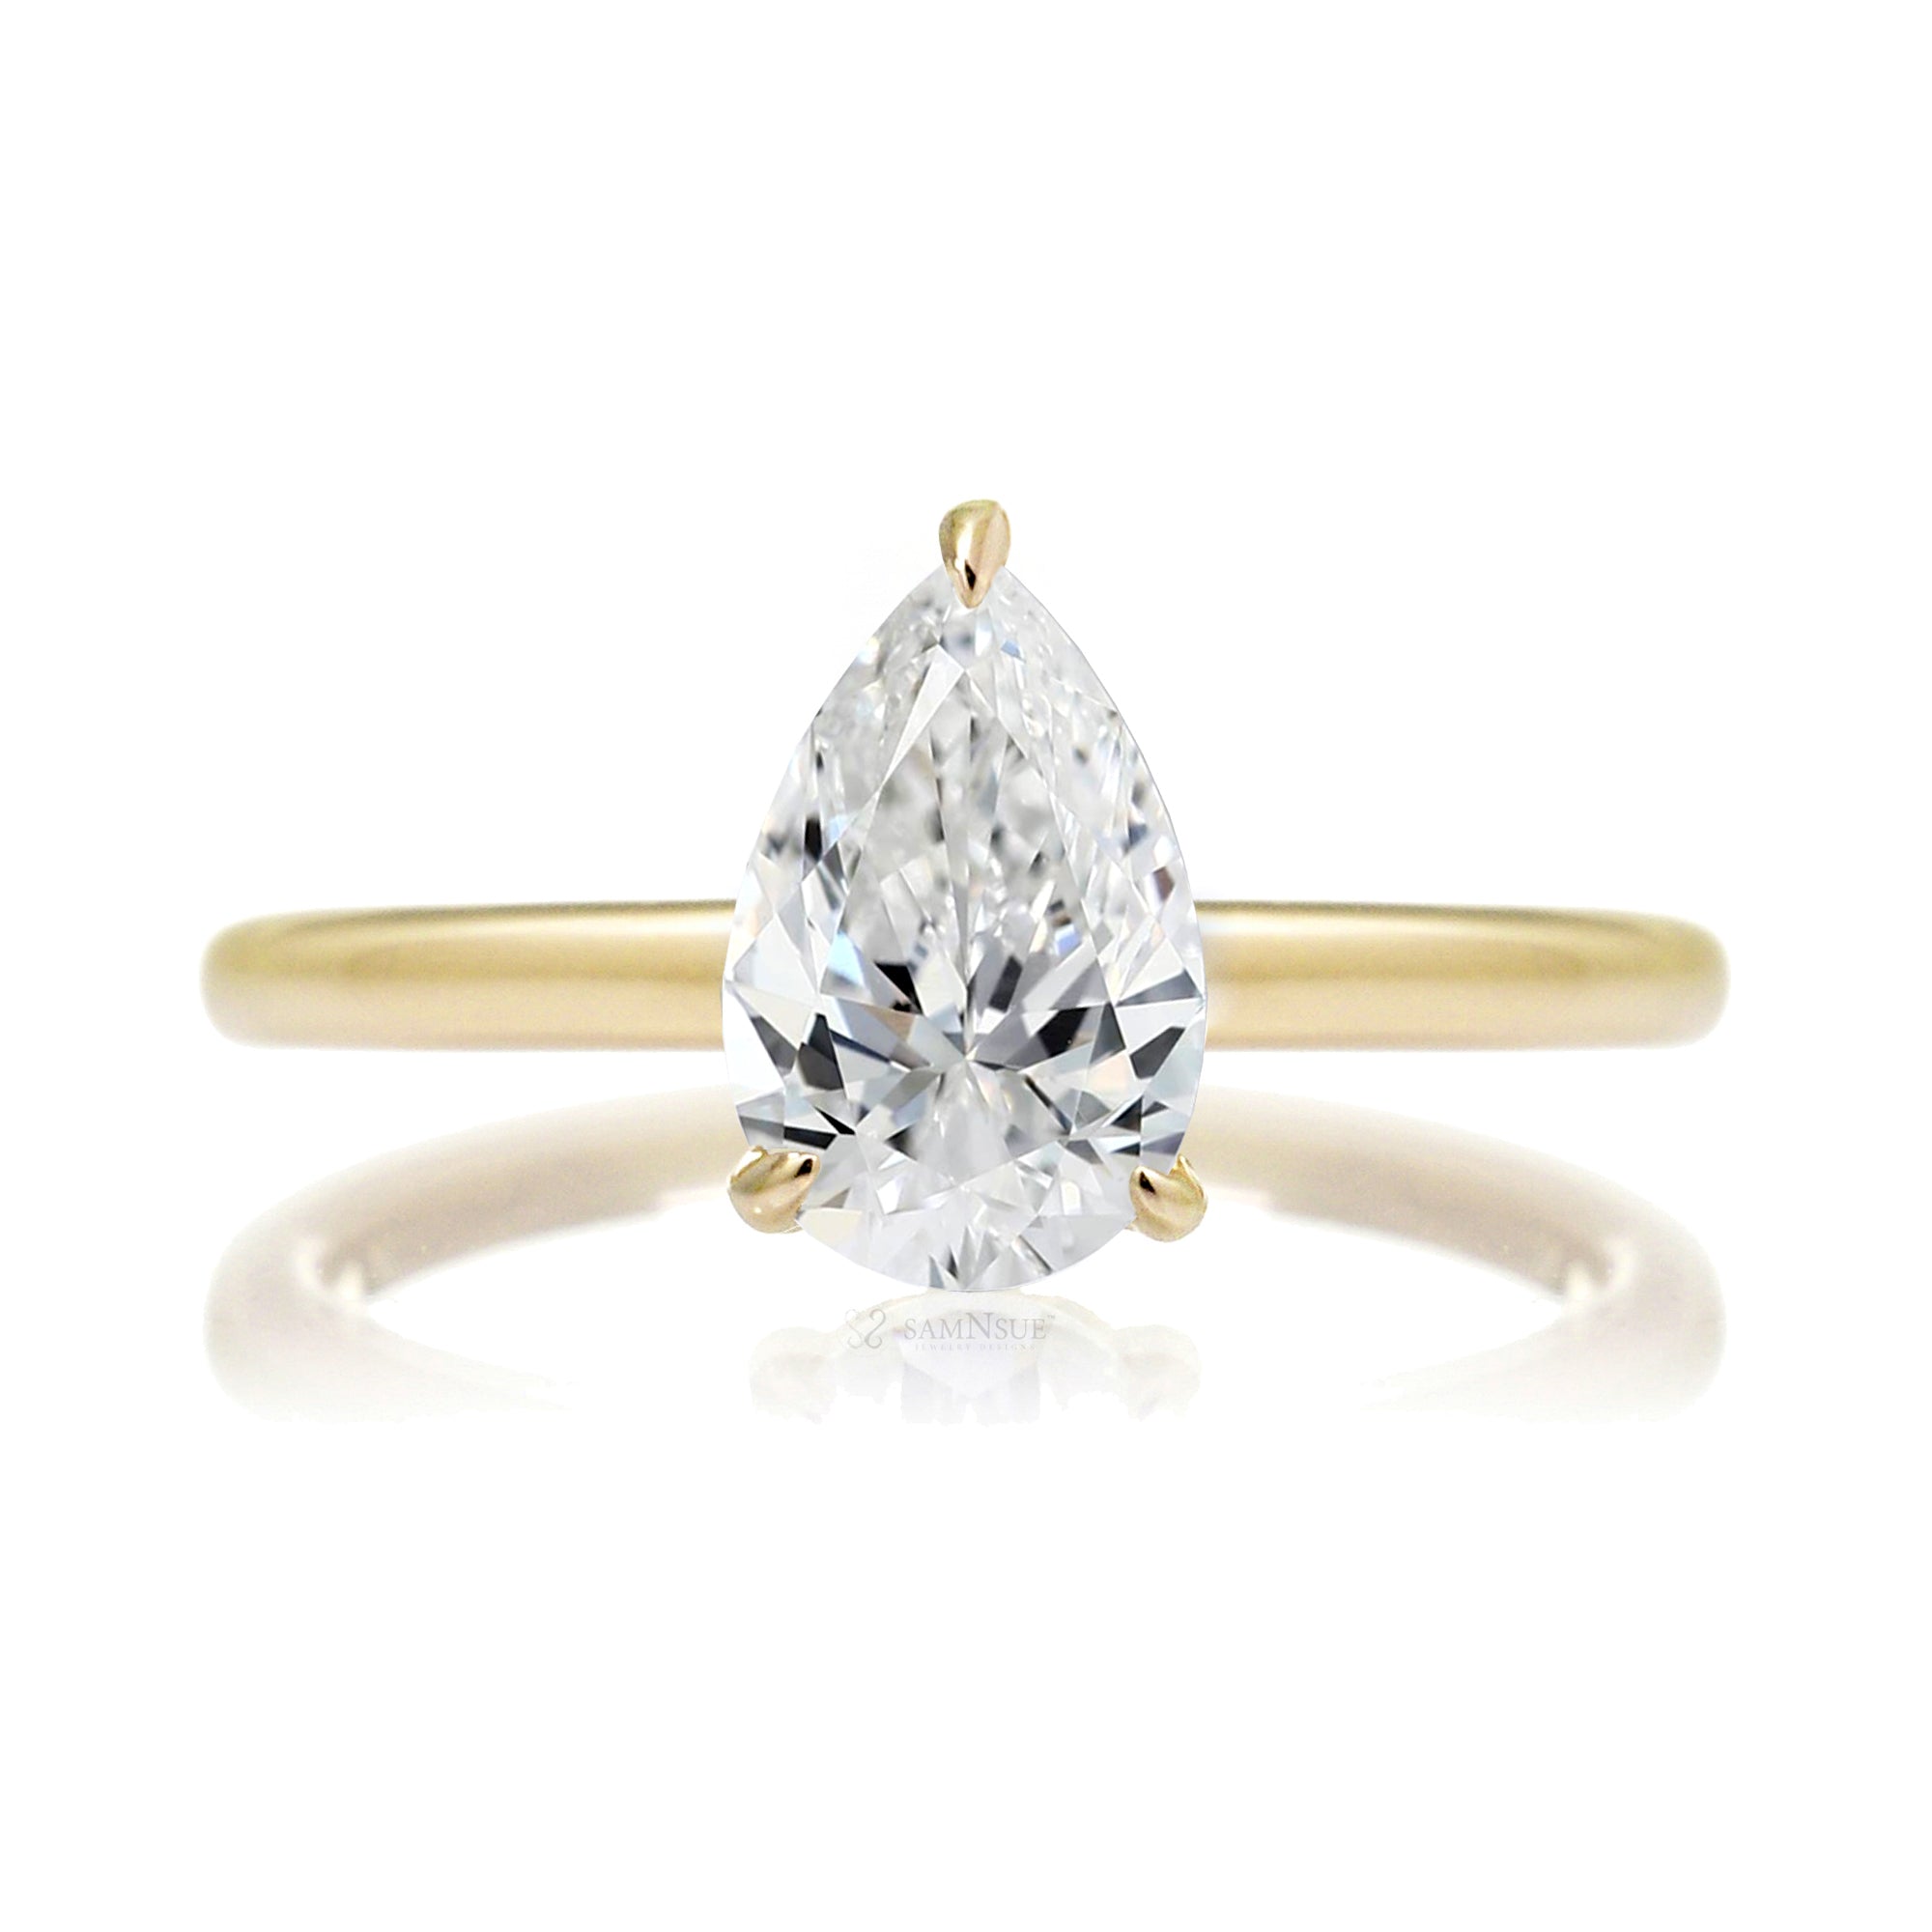 Pear cut solitaire diamond engagement ring with a hidden halo and solid polished band in yellow gold